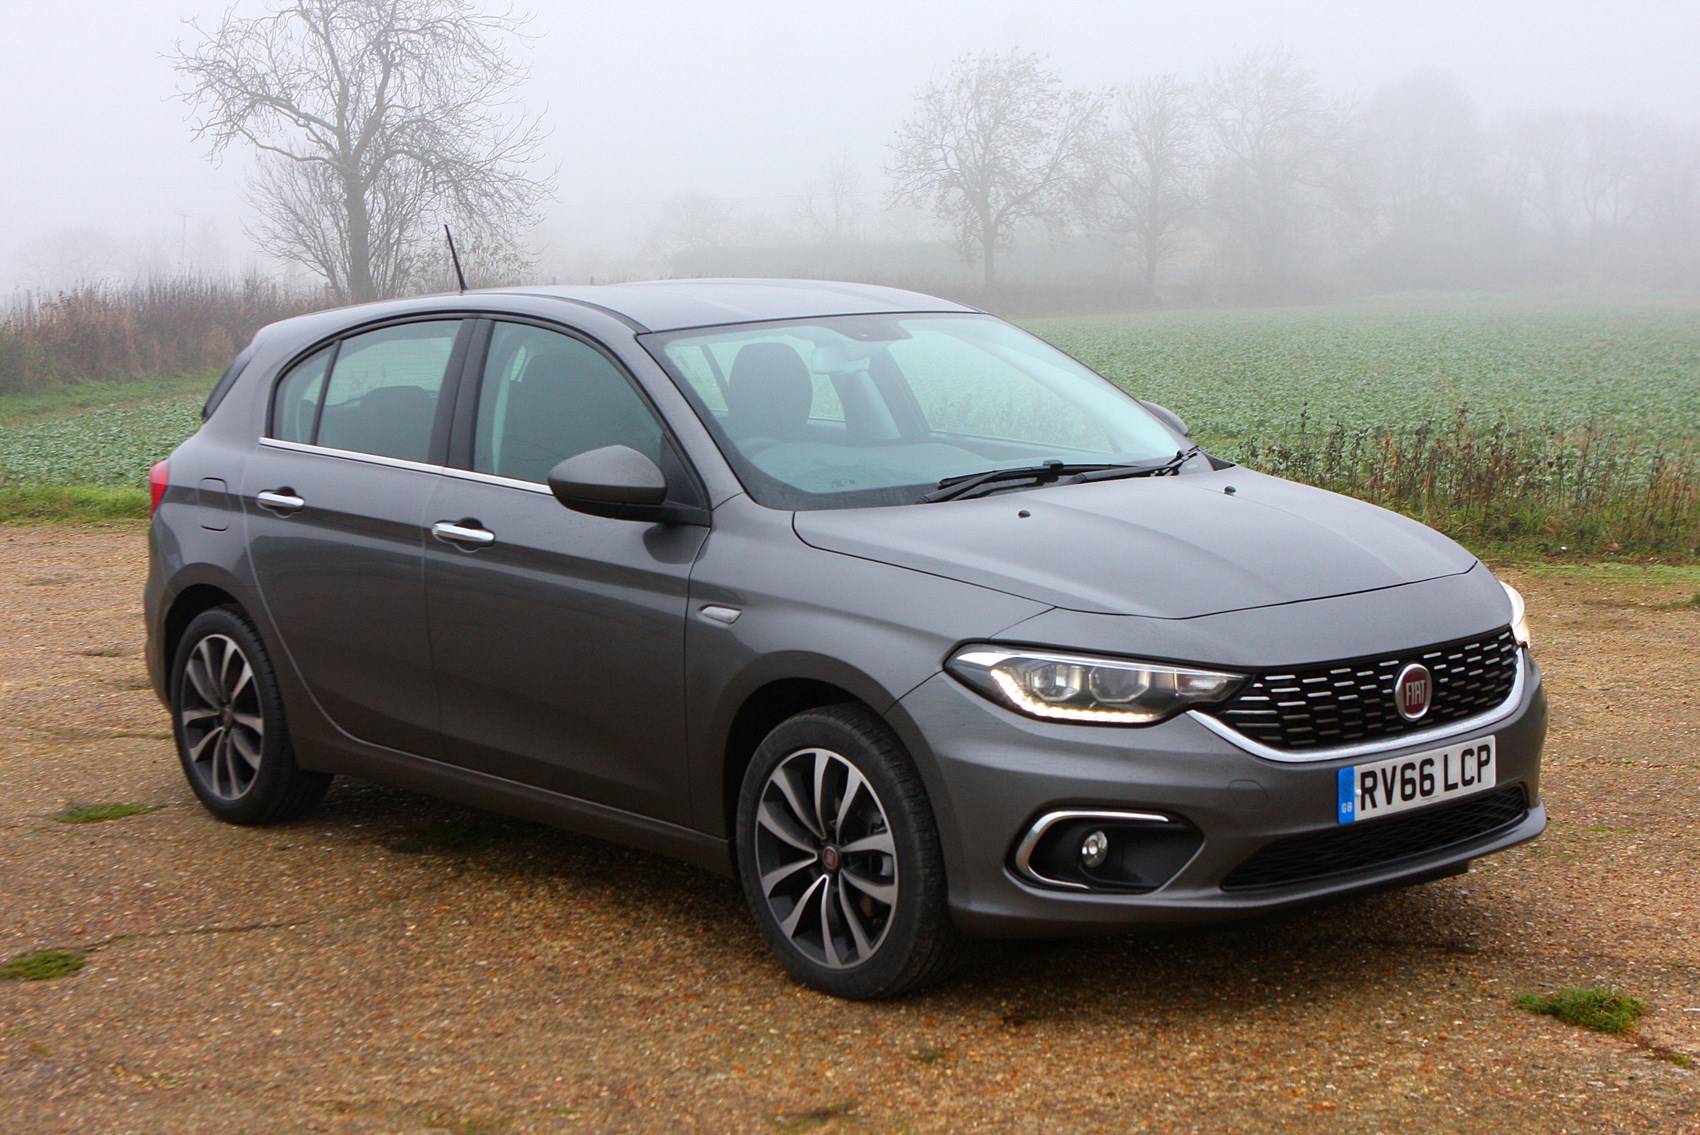 Fiat Tipo Hatchback (2016 ) Photos Parkers